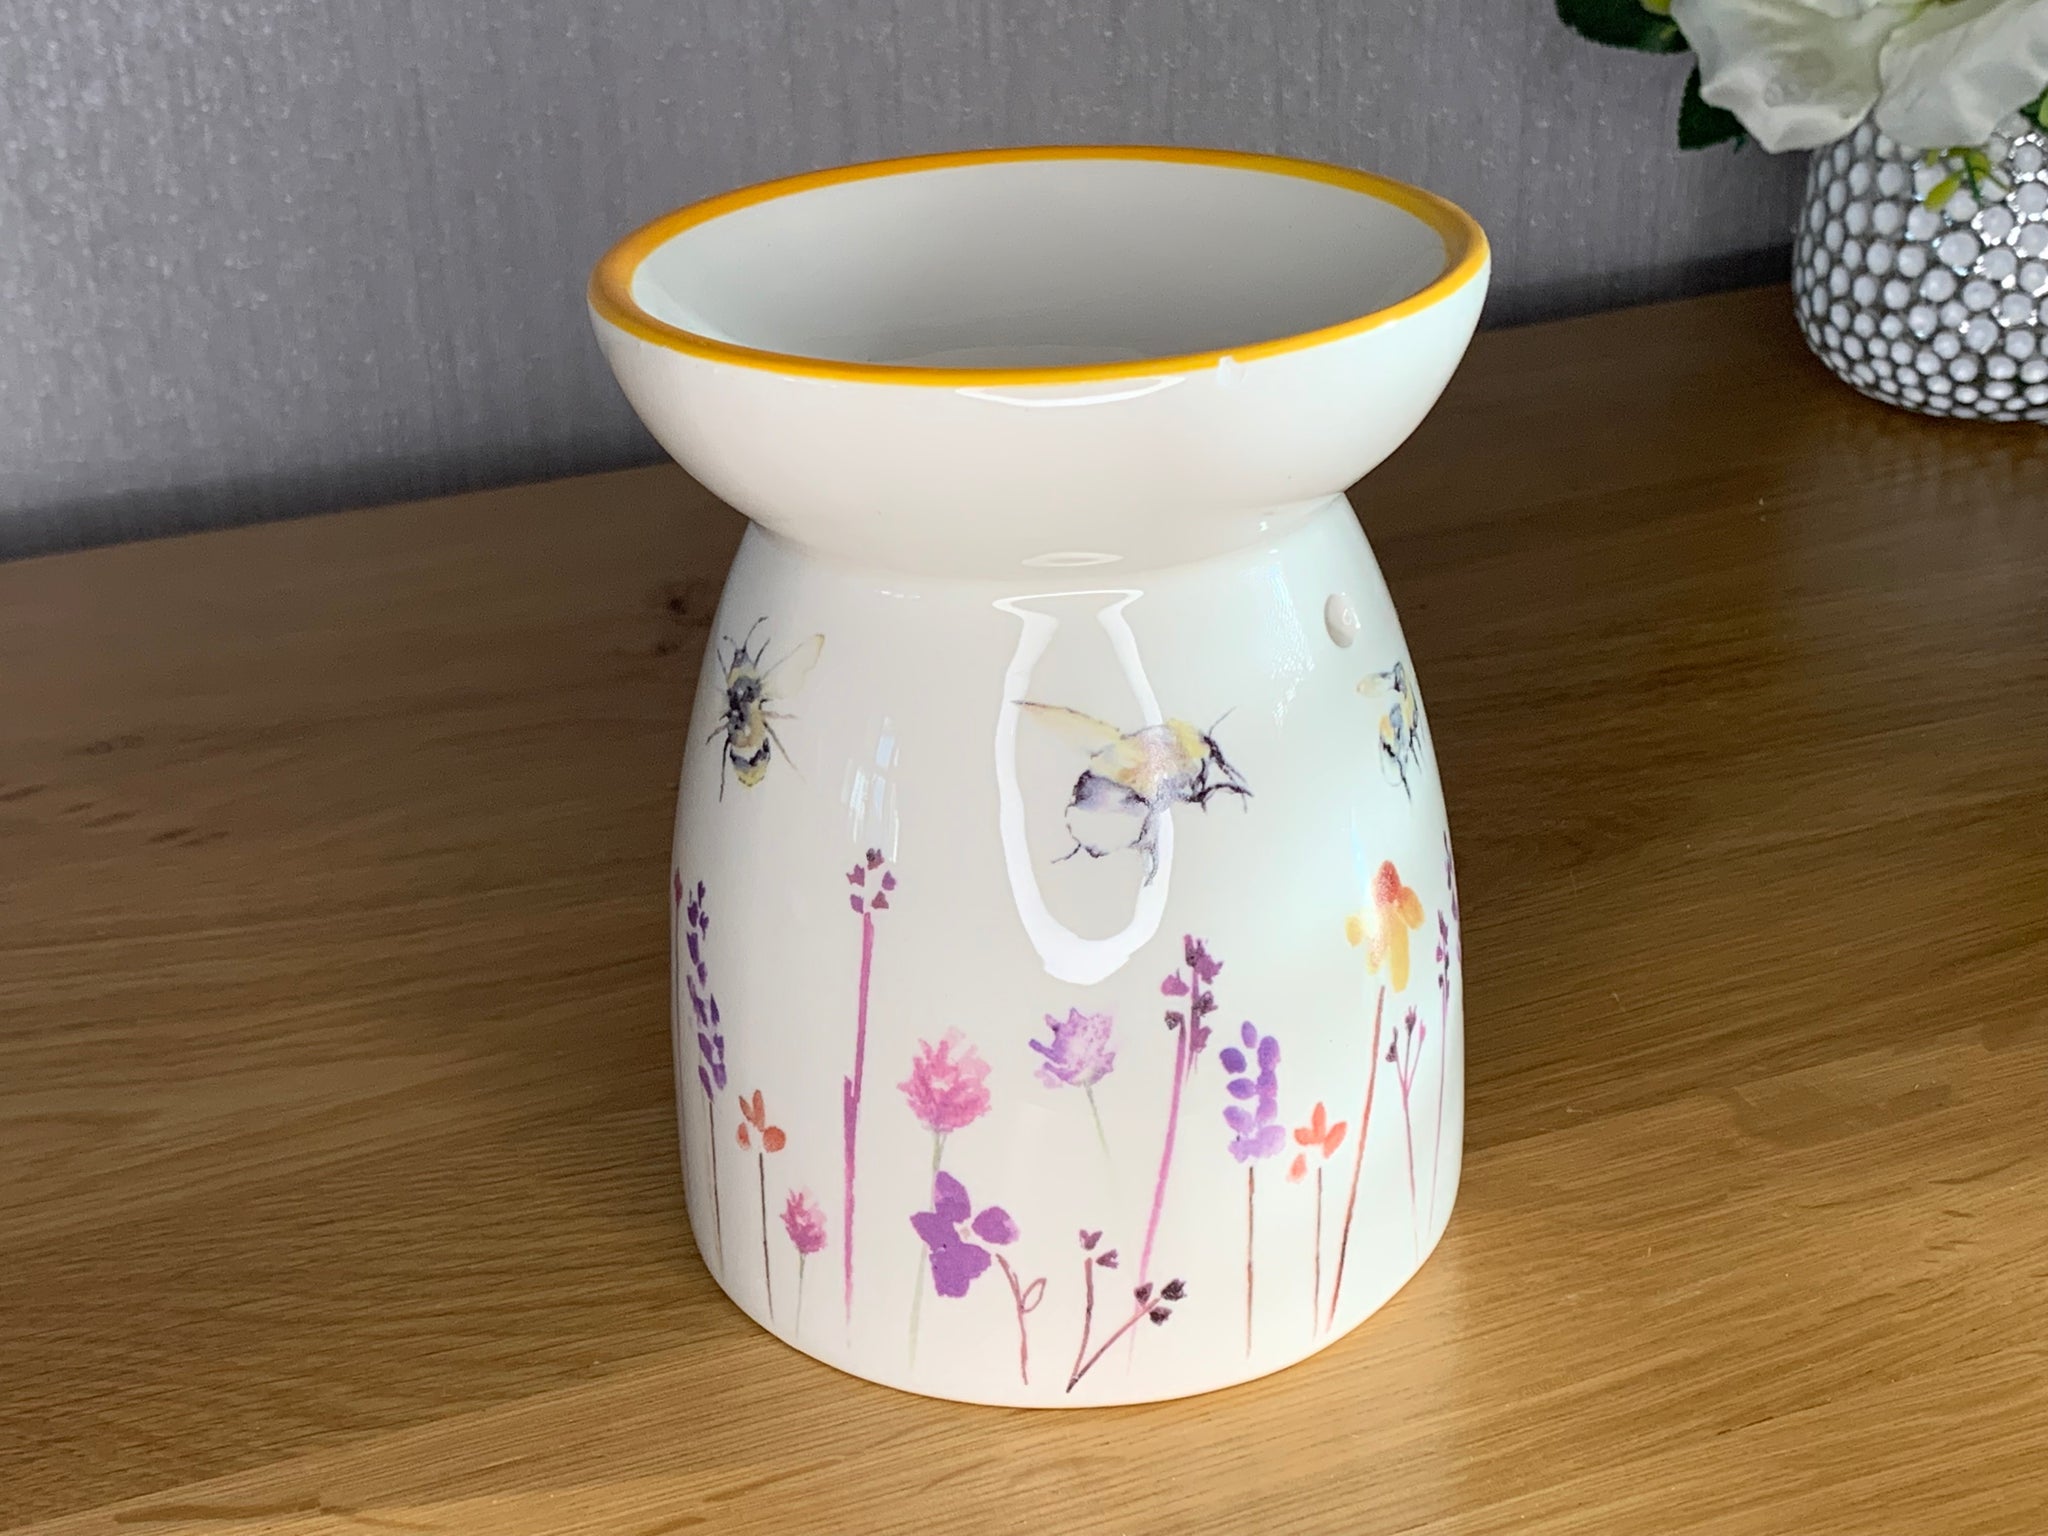 Bee Inspired Oil/Wax Burner – Meant to bee gift company